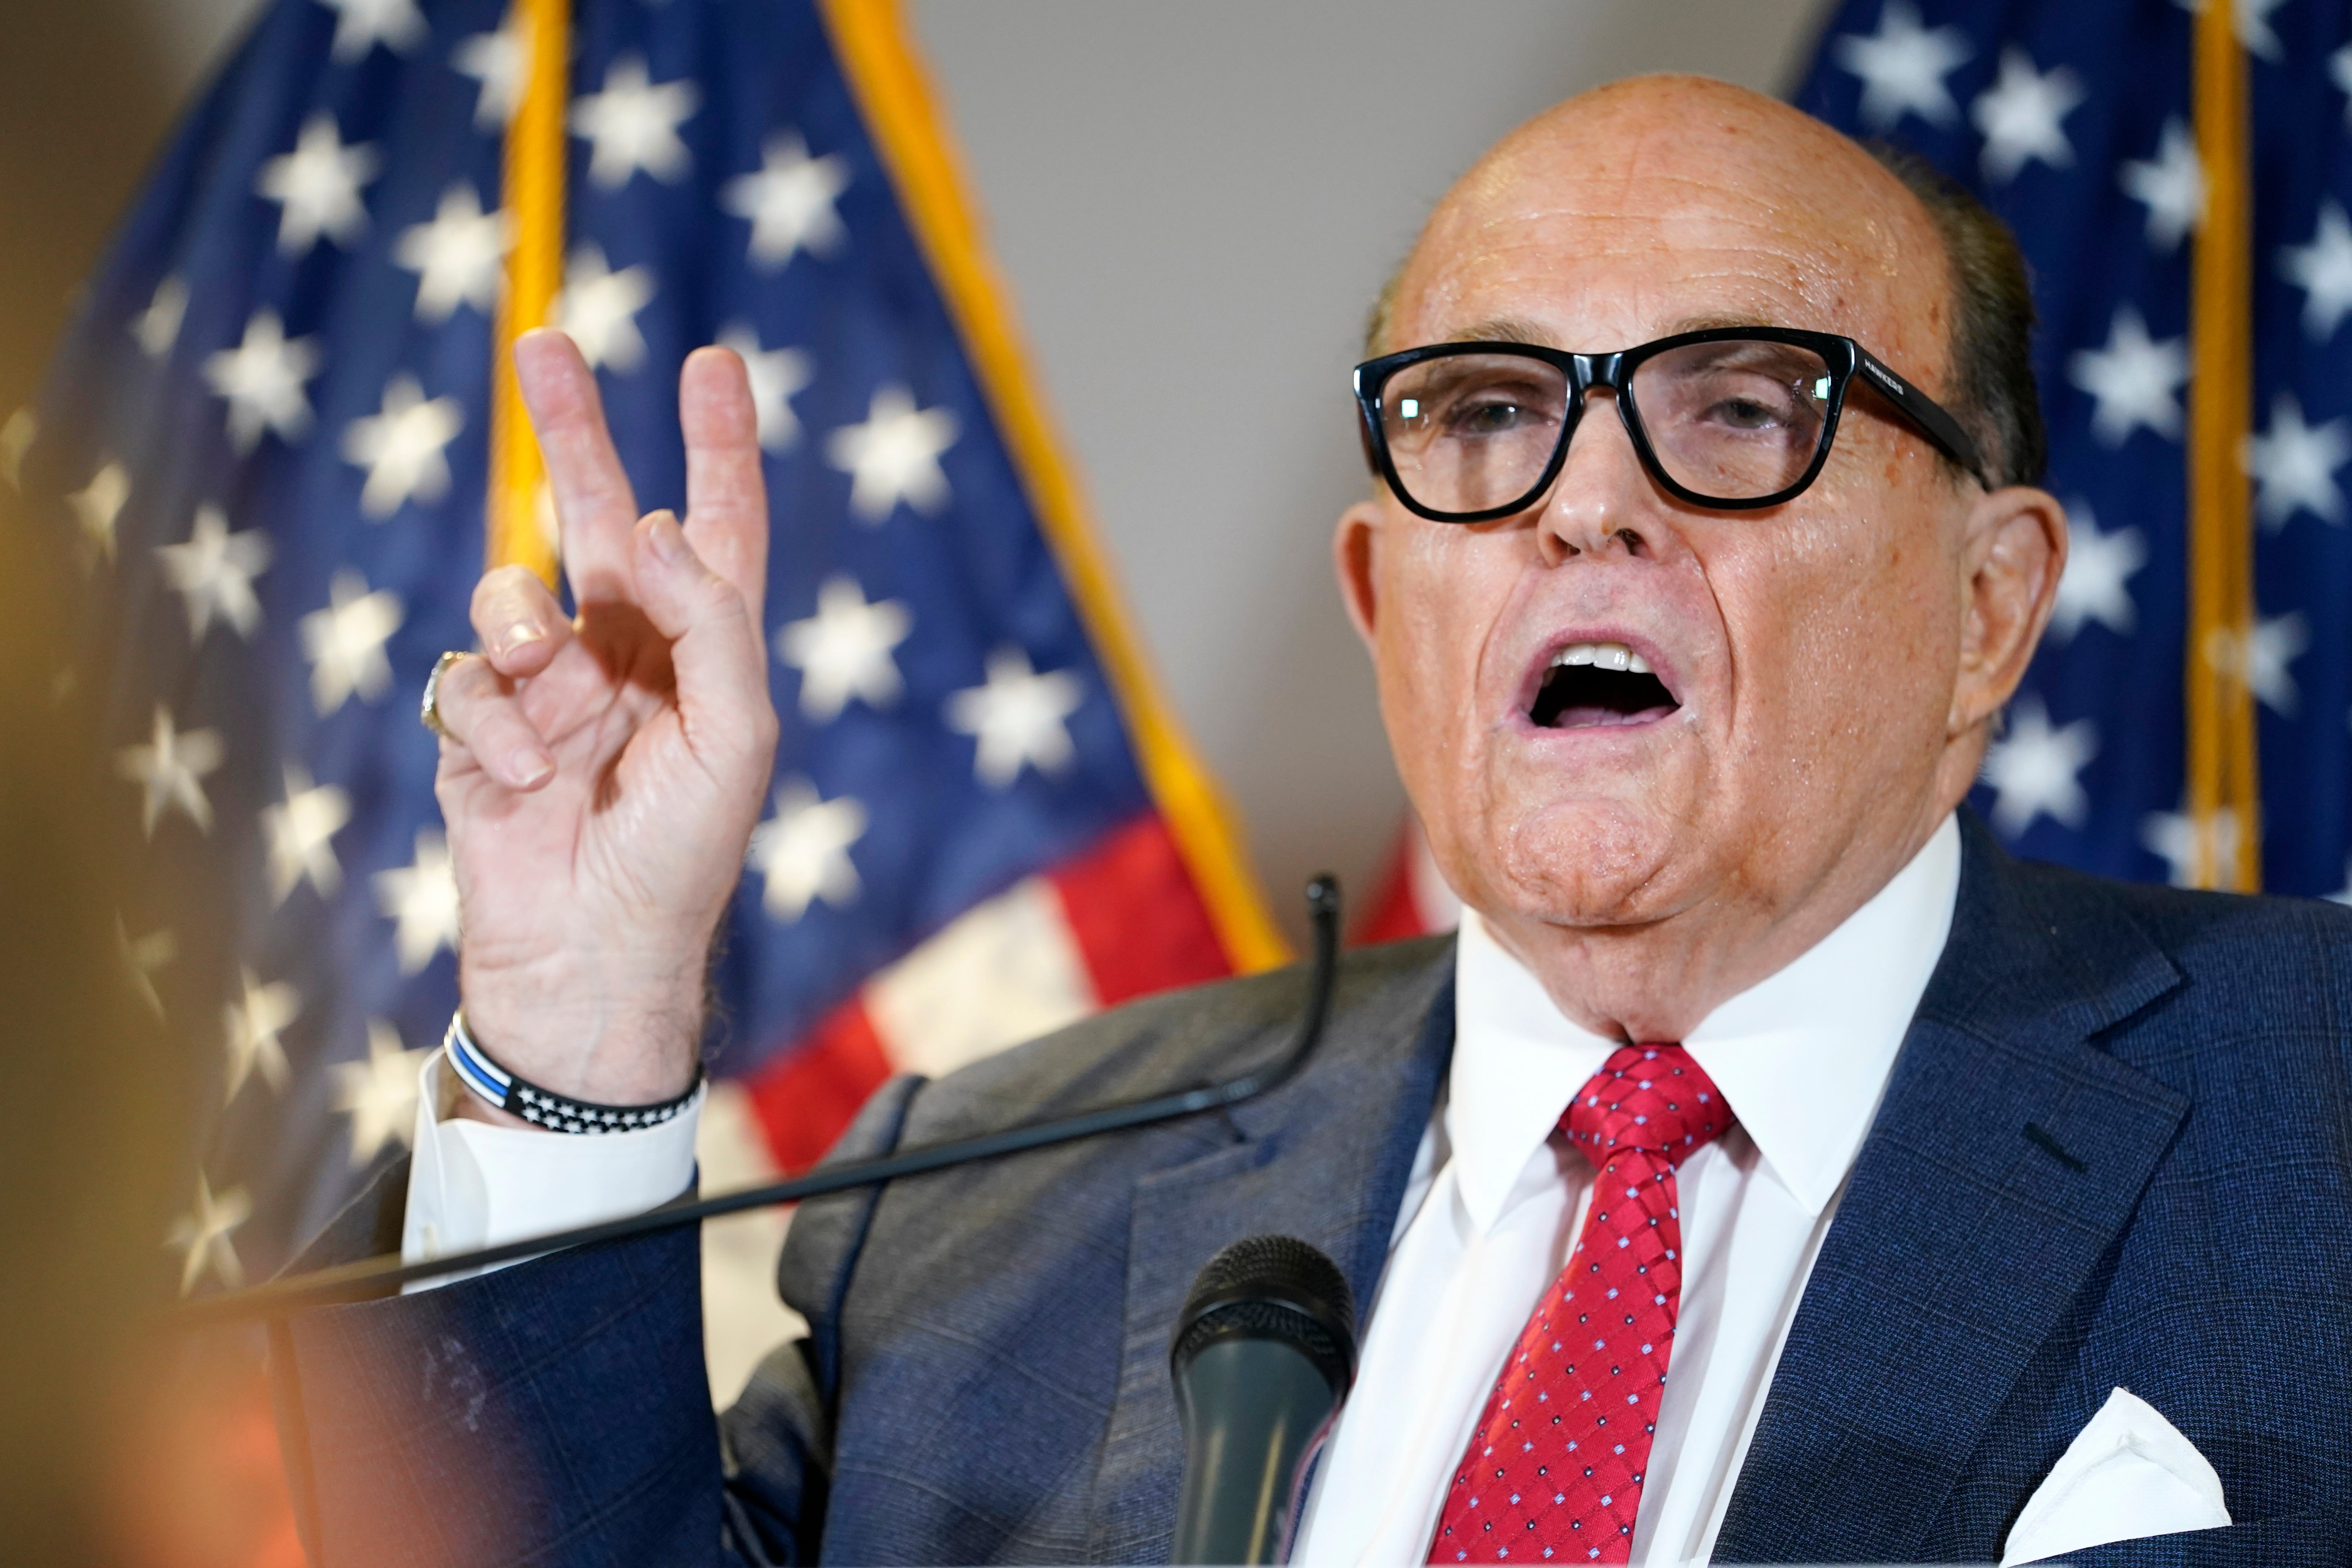 Giuliani has spectacularly fallen from grace this year